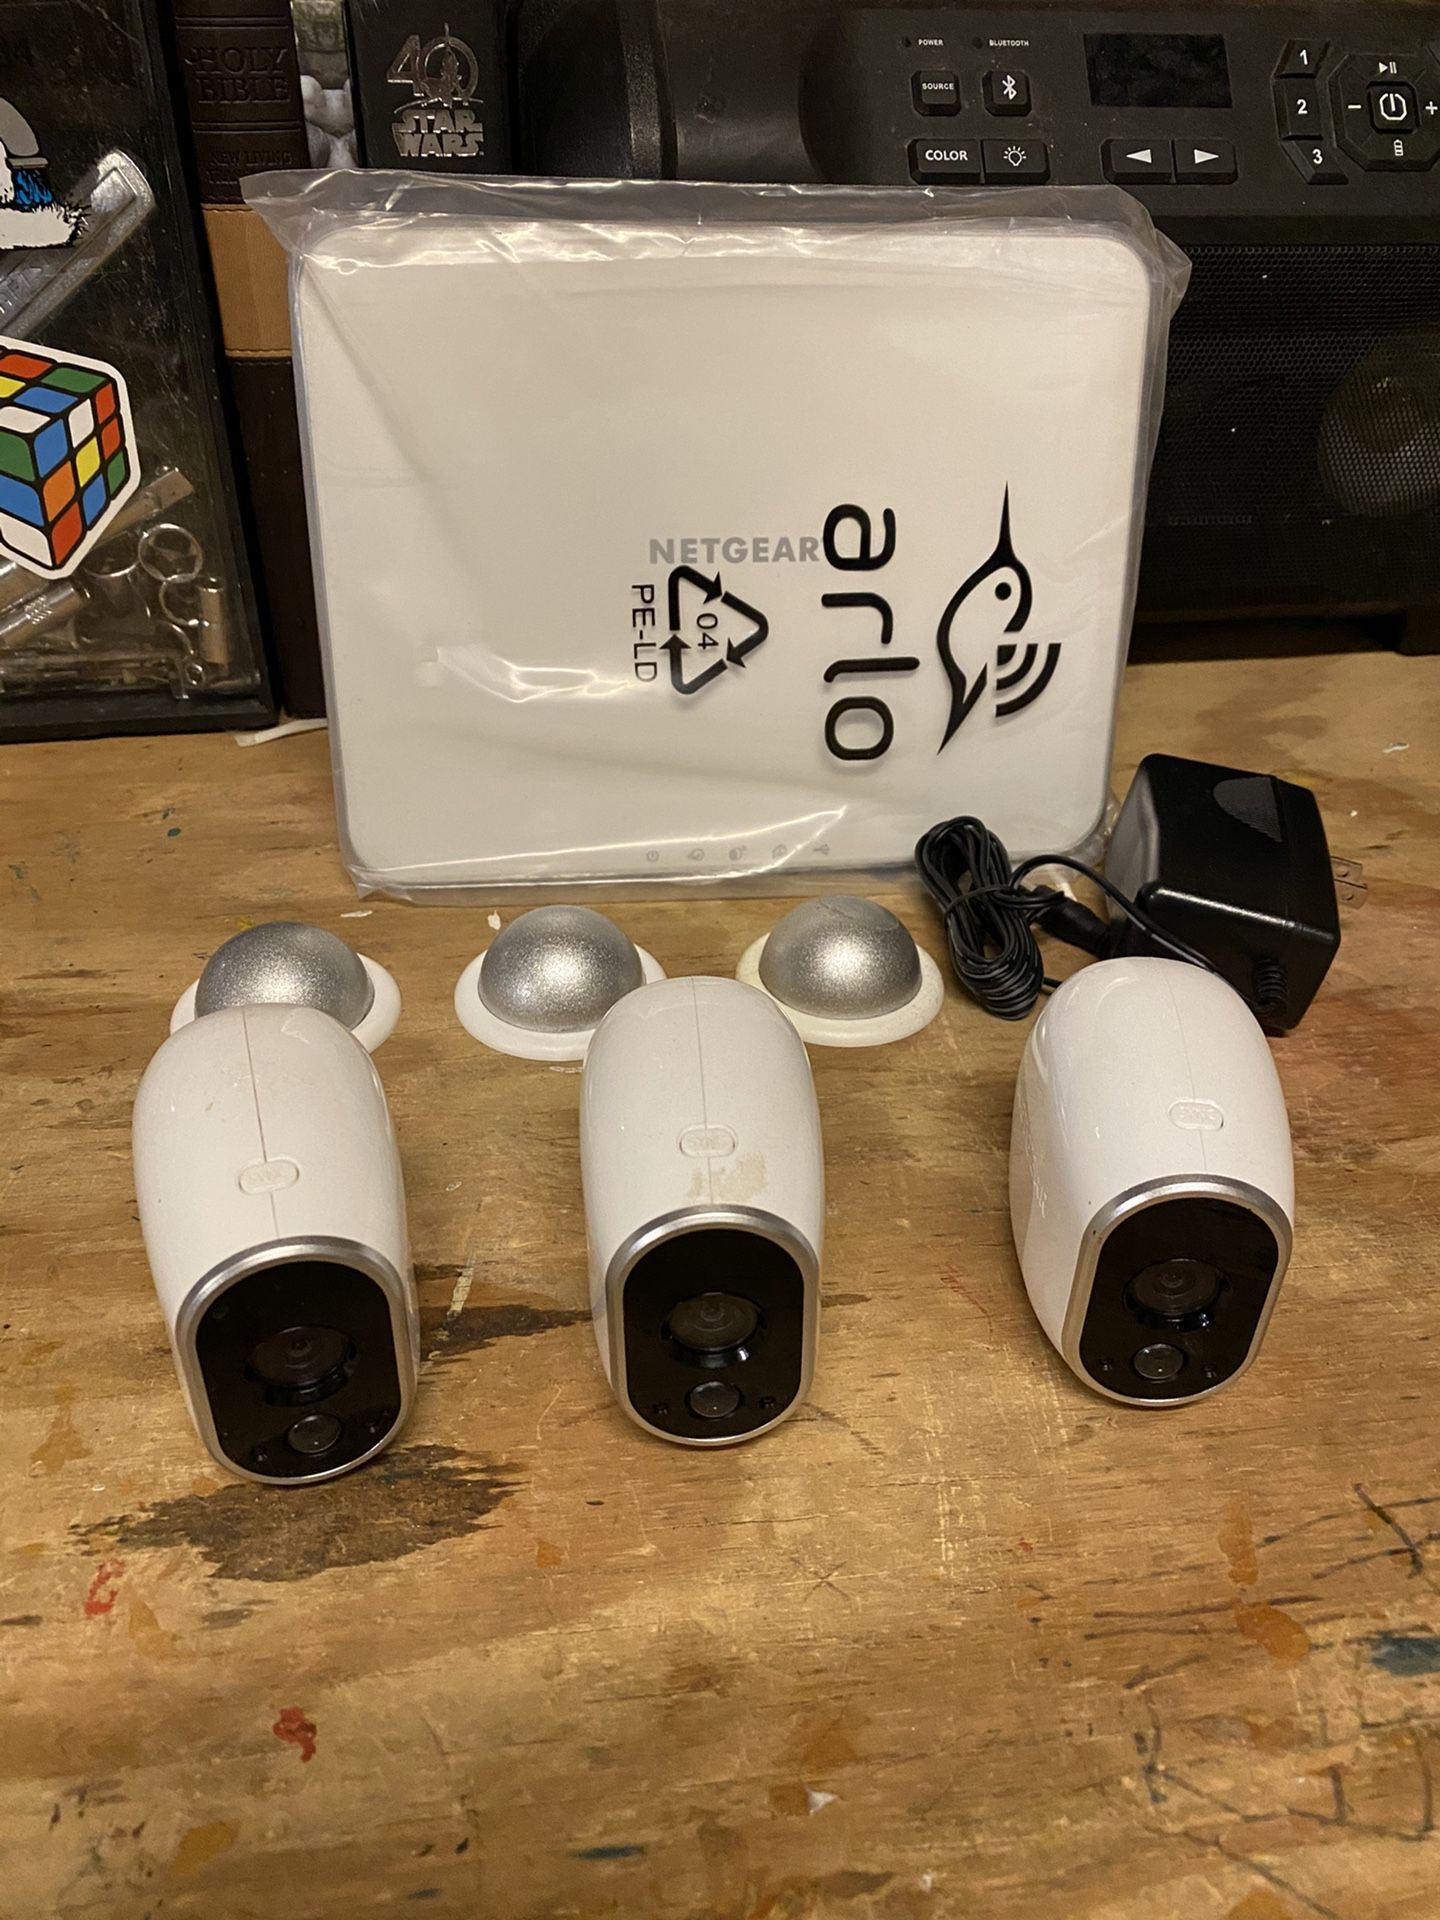 Arlo Security System - Base Station and 3 cameras